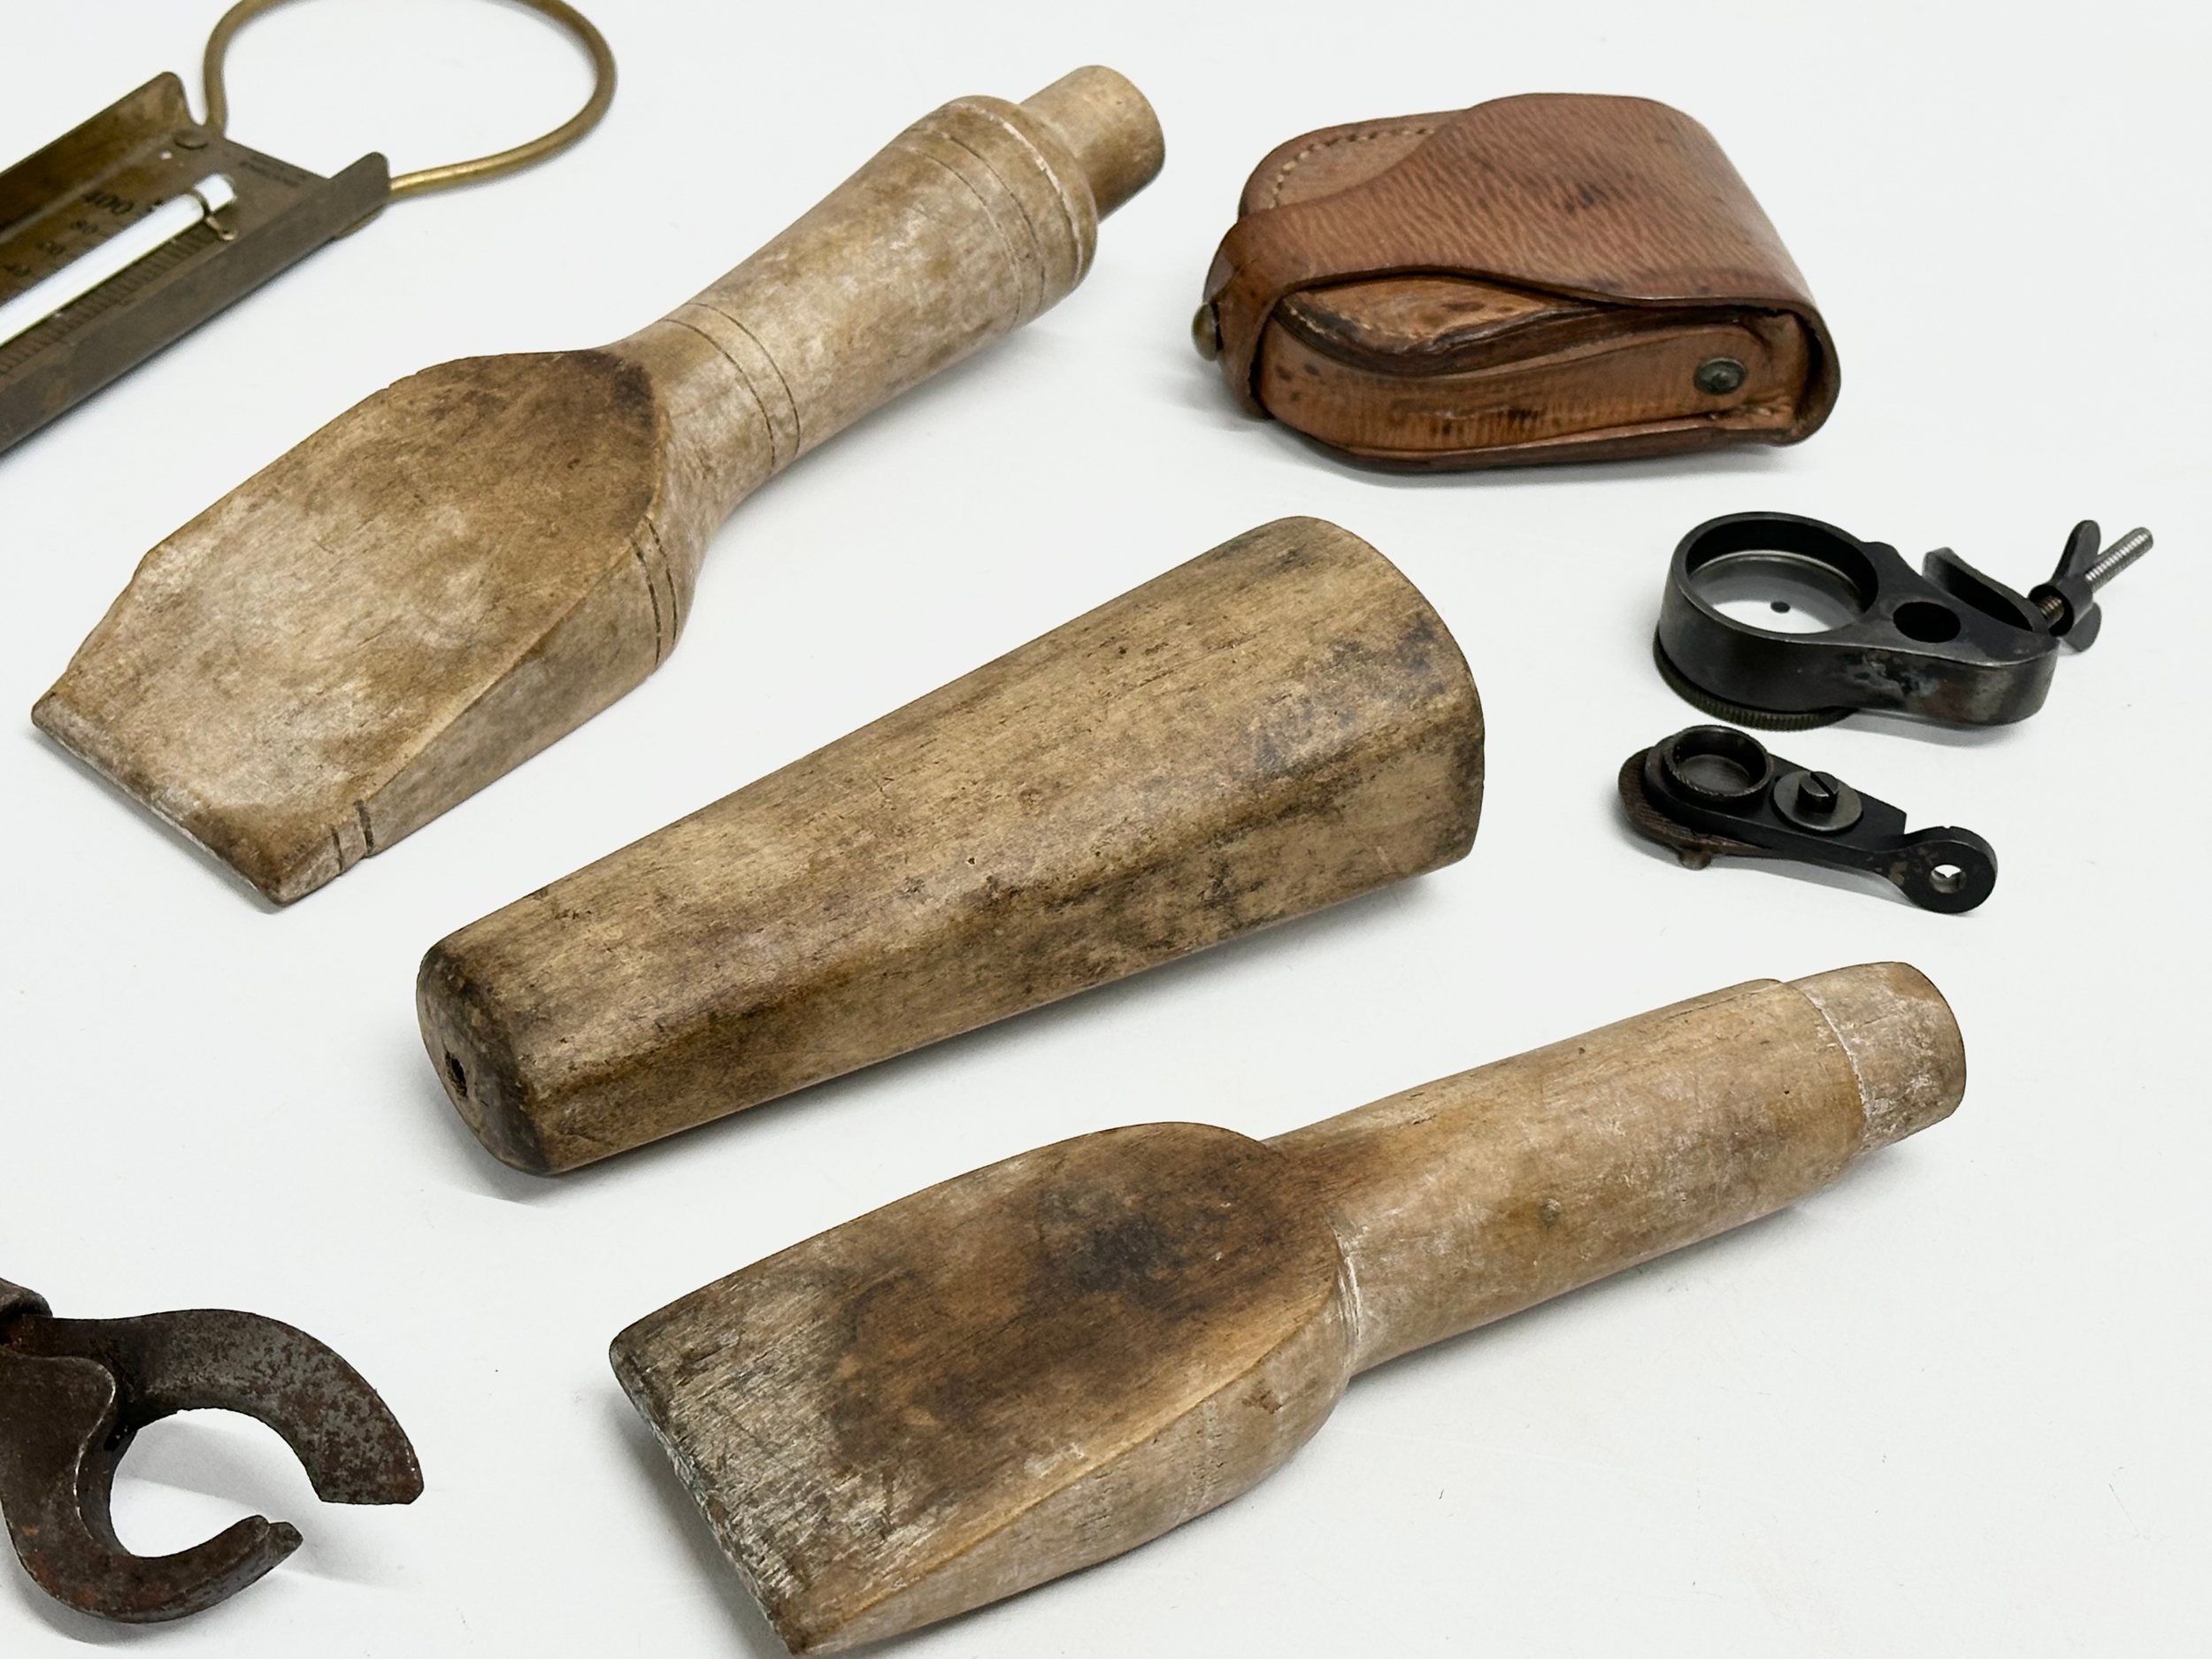 A job lot. 3 late 19th century wooden tools, barometer, scope with case etc. - Image 2 of 5